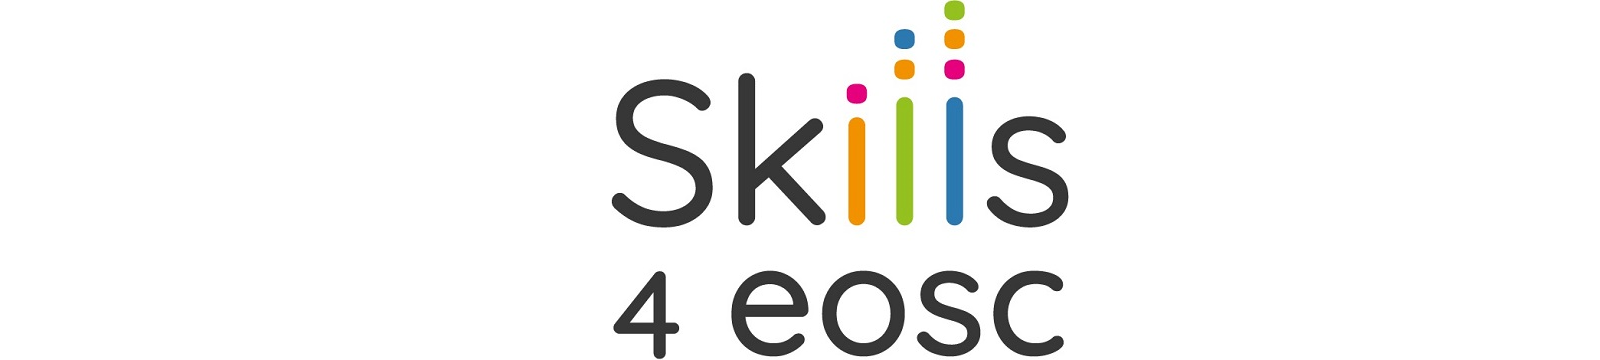 Skill4EOSC kicks off for training open science in Europe